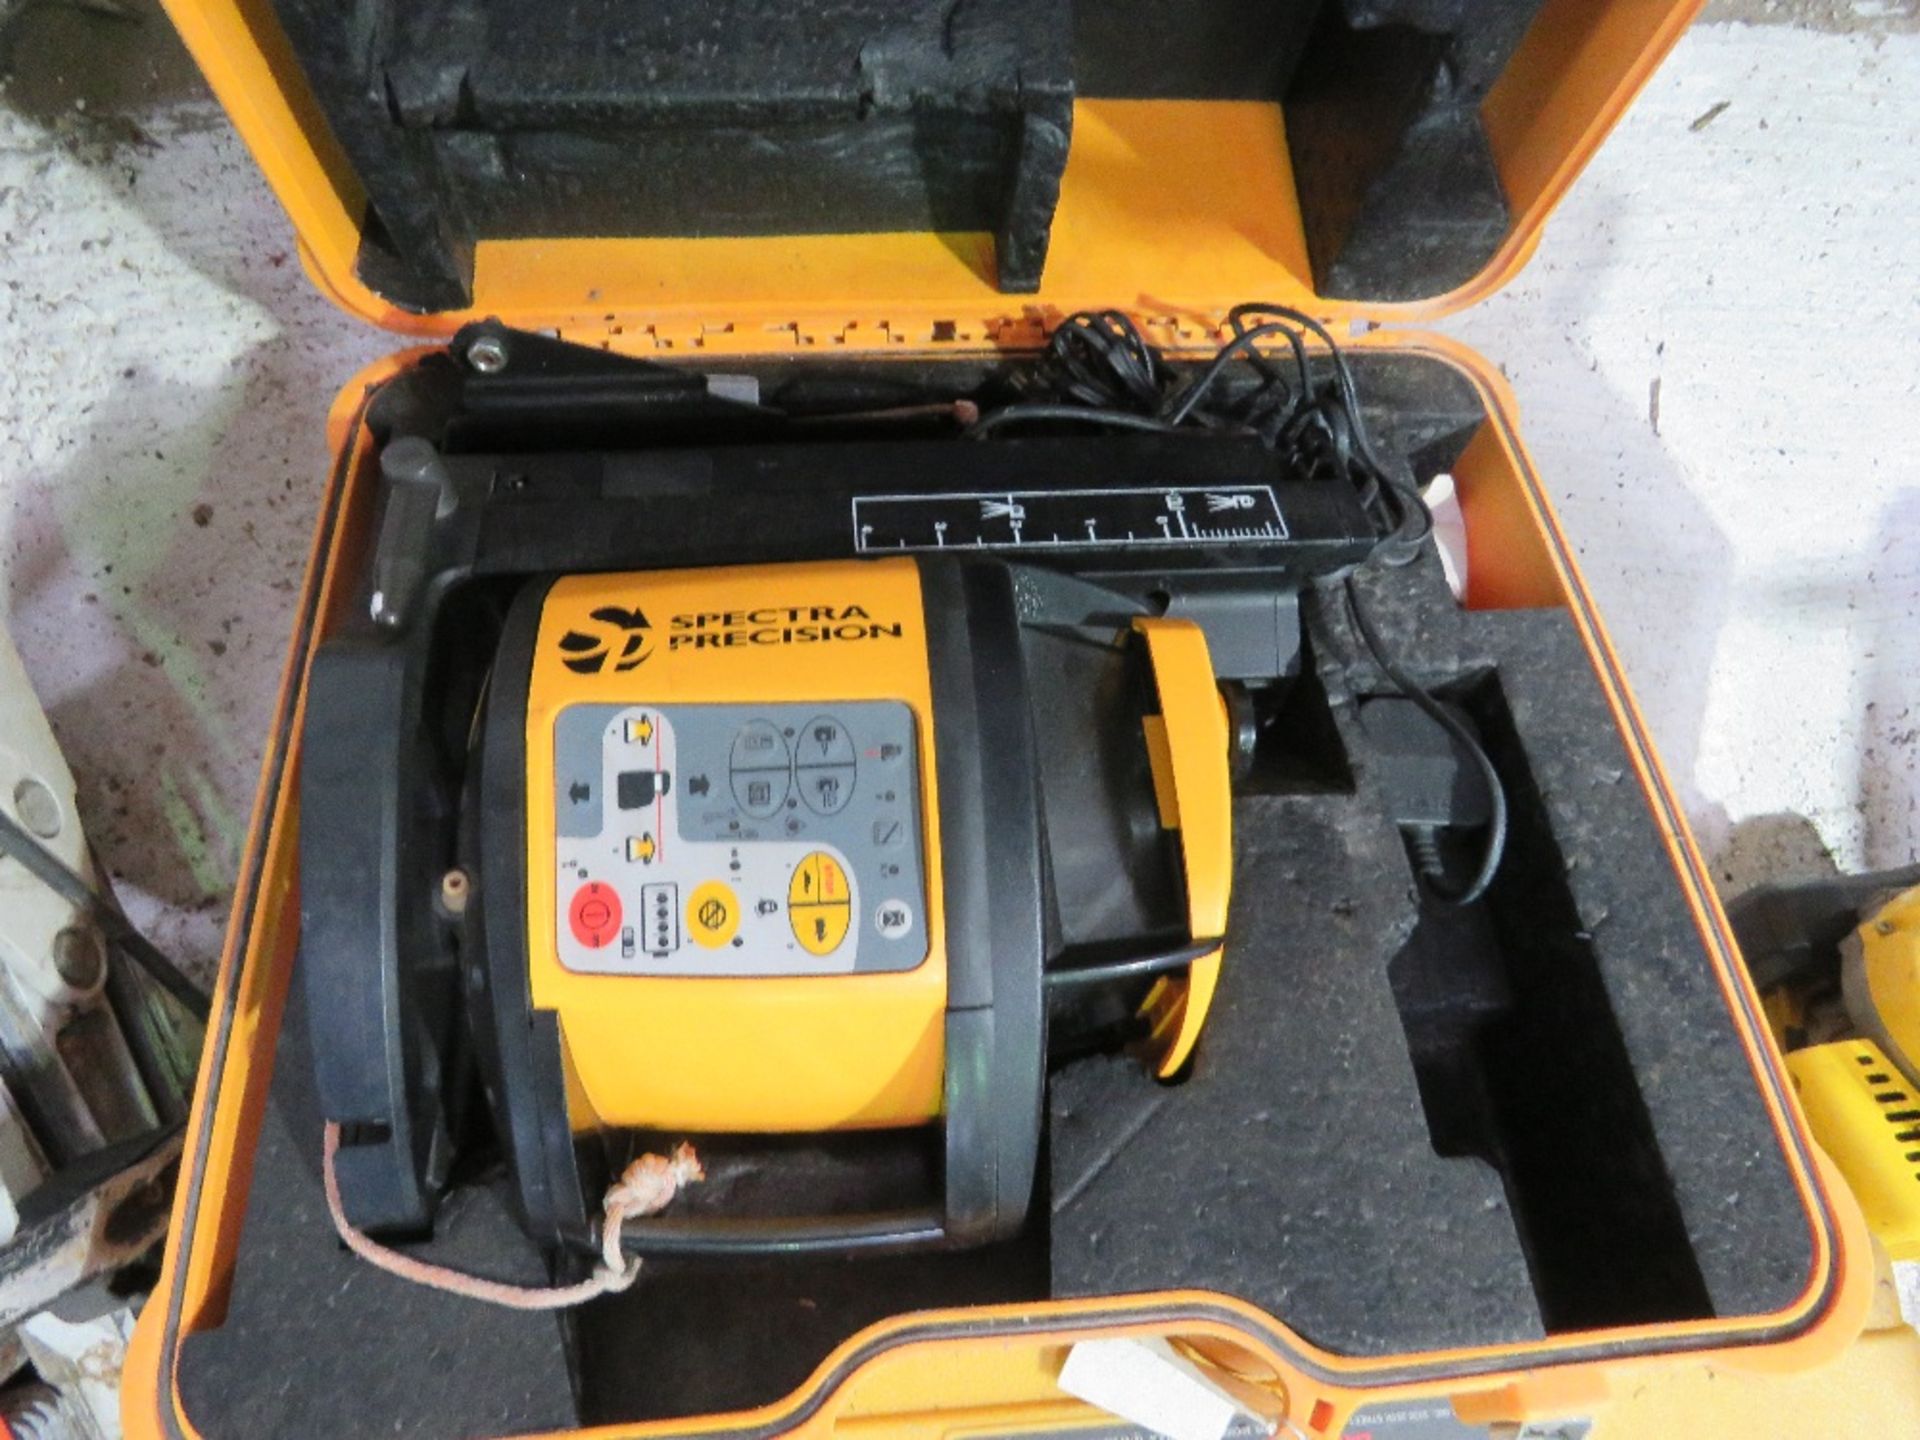 SPECTRA PRECISION LASER LEVEL SET IN A CASE. DIRECT FROM LOCAL COMPANY.